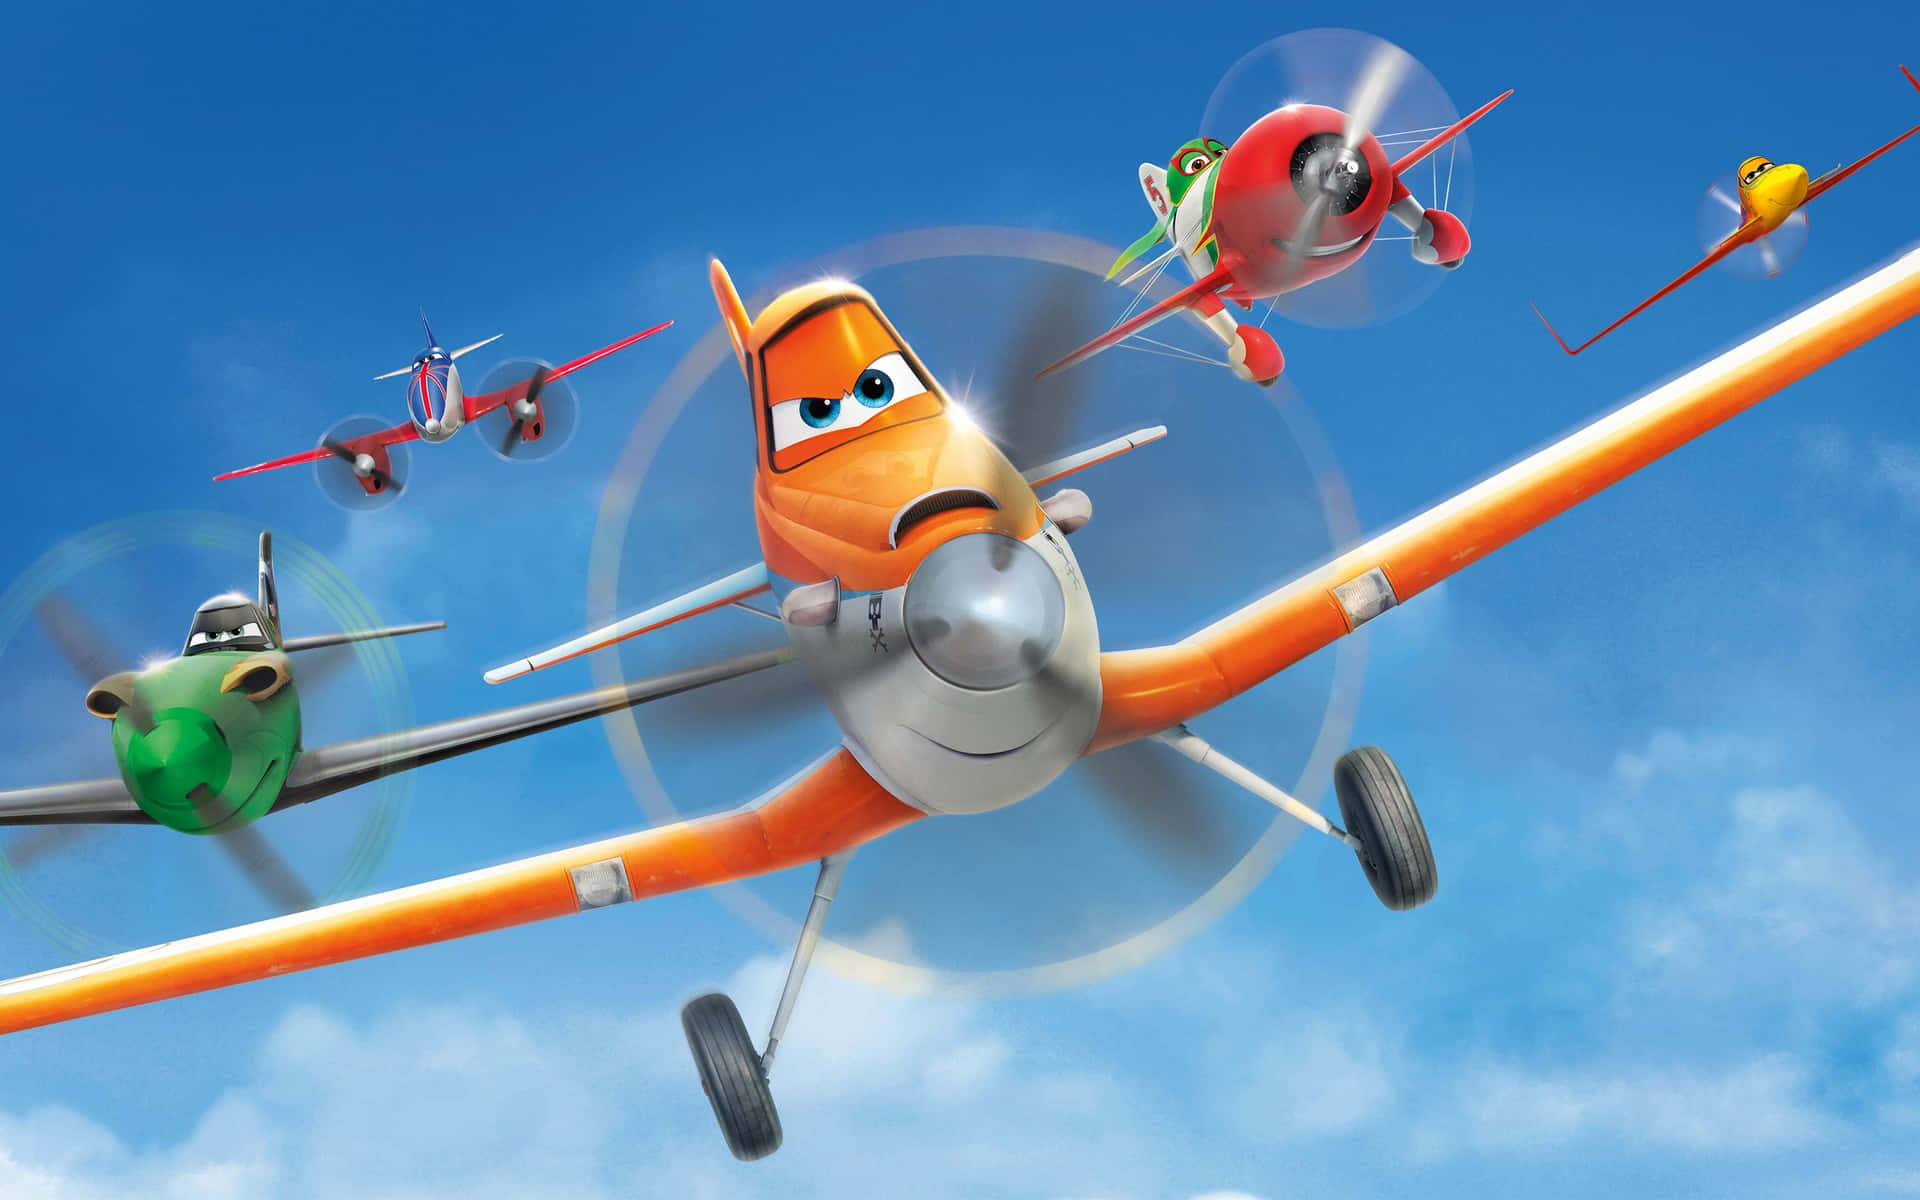 Colorful Disney Planes Soaring High In The Sky Wallpaper